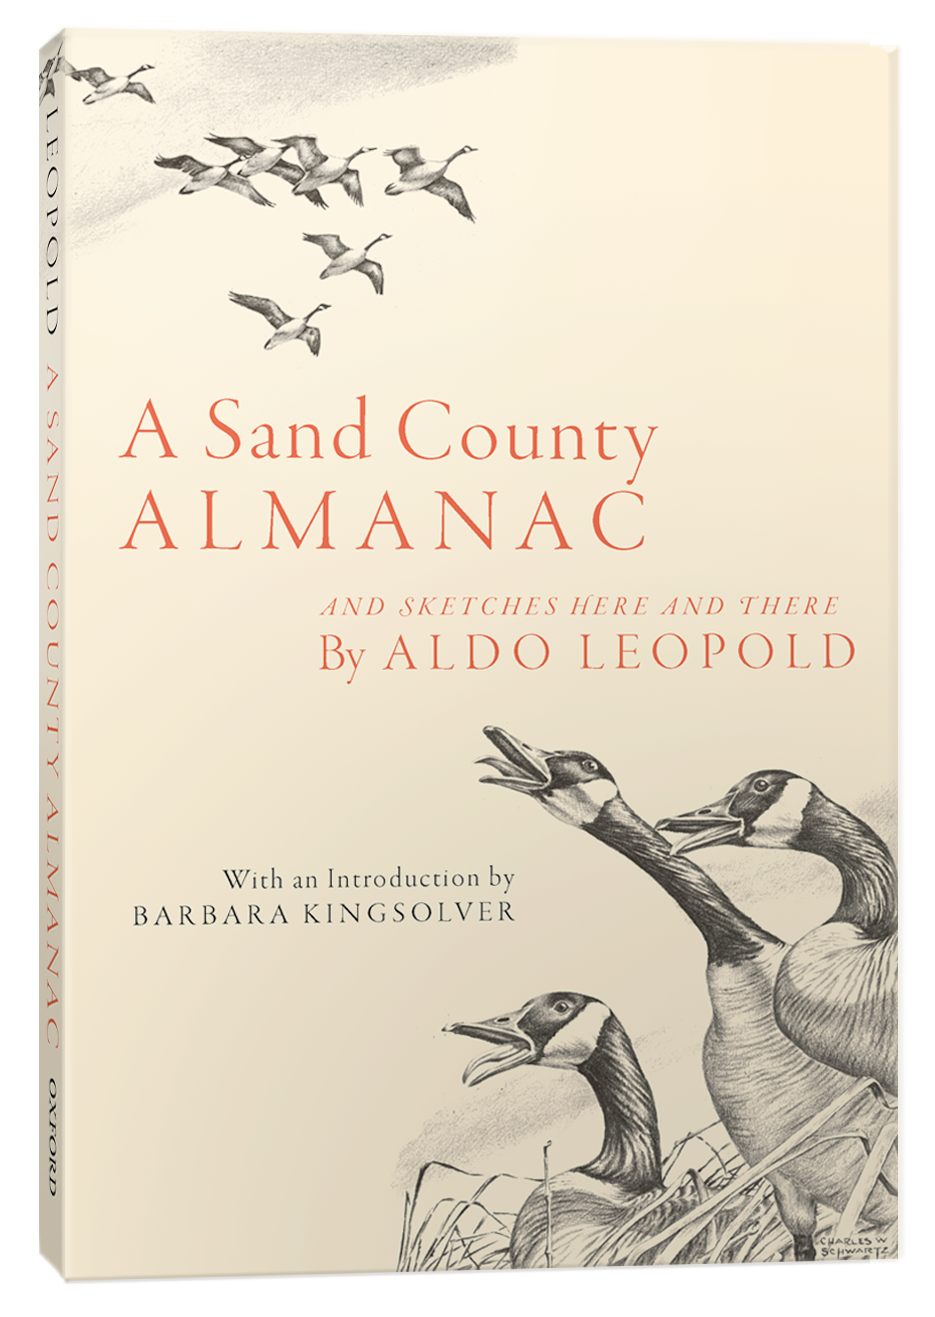 "A Sand County Almanac" by Aldo Leopold has inspired many conservationists and authors, including Barbara Kingsolver and Delia Owens.